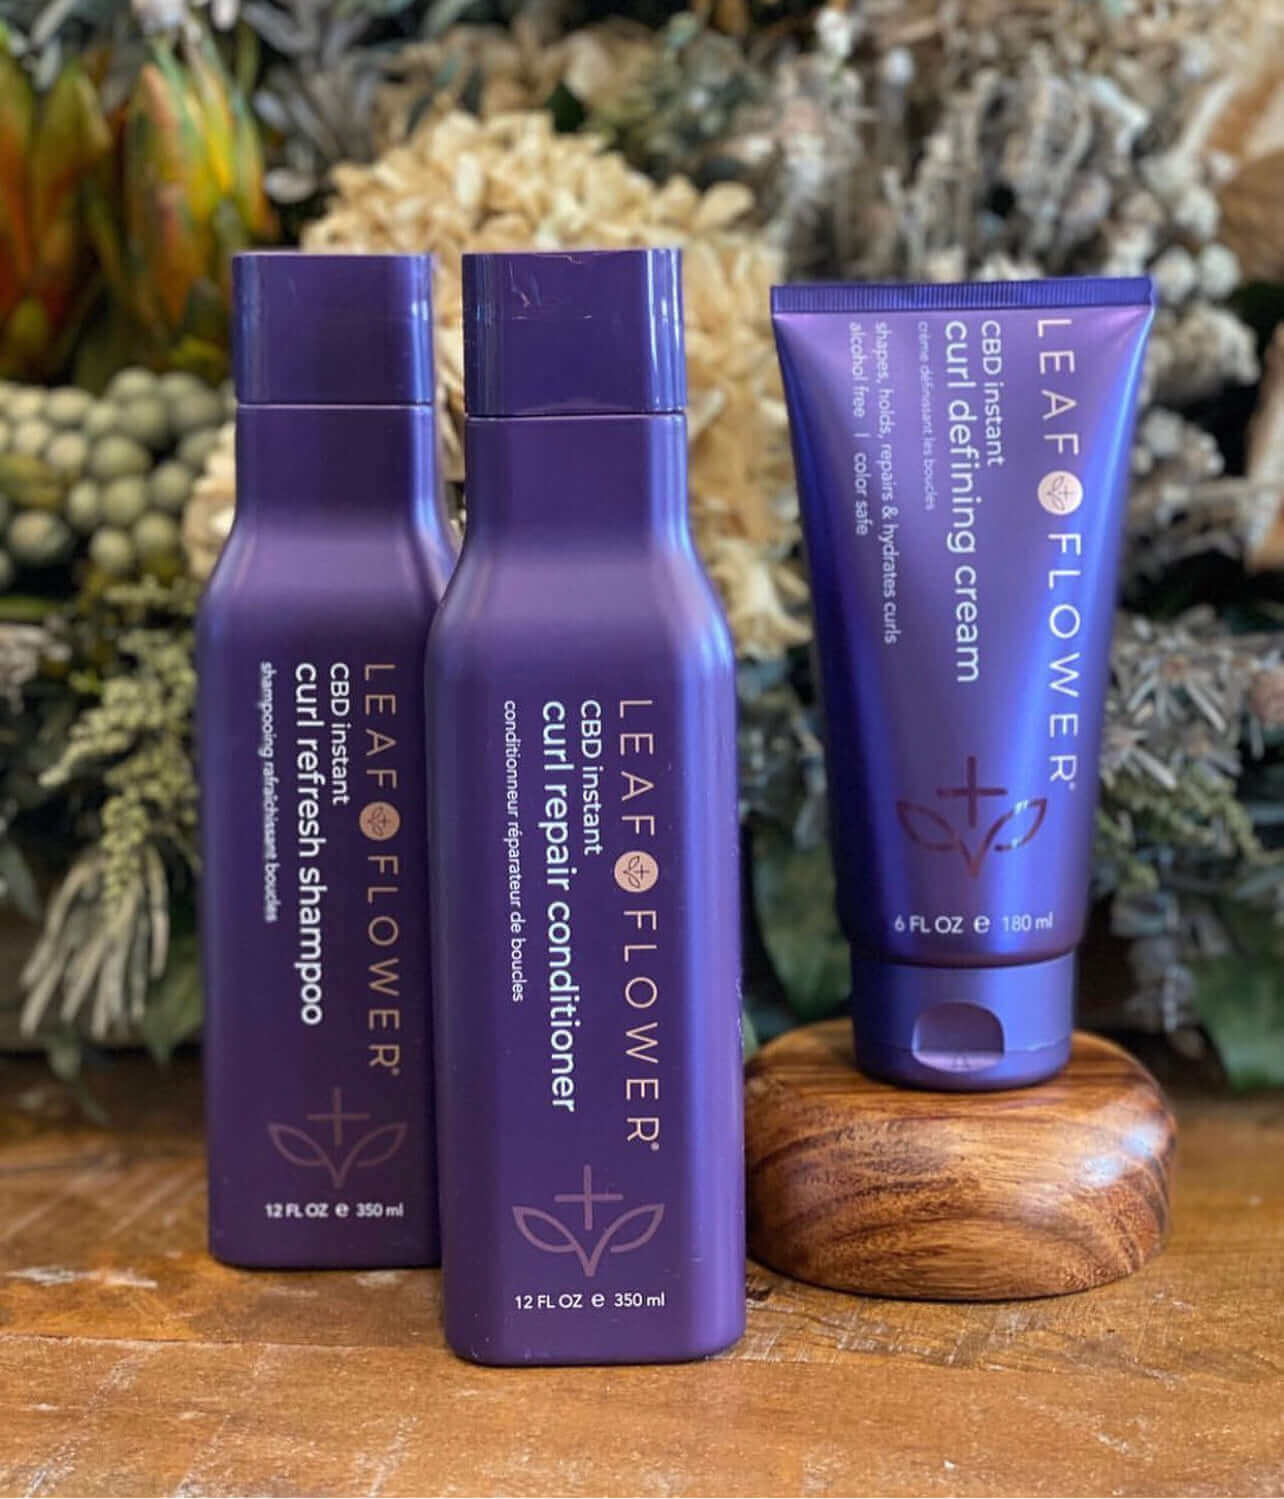 Three bottles of Leaf and Flower Instant Curl Refresh Conditioner, designed to provide intense hydration and create ultra-soft curls, are sitting on a wooden table.